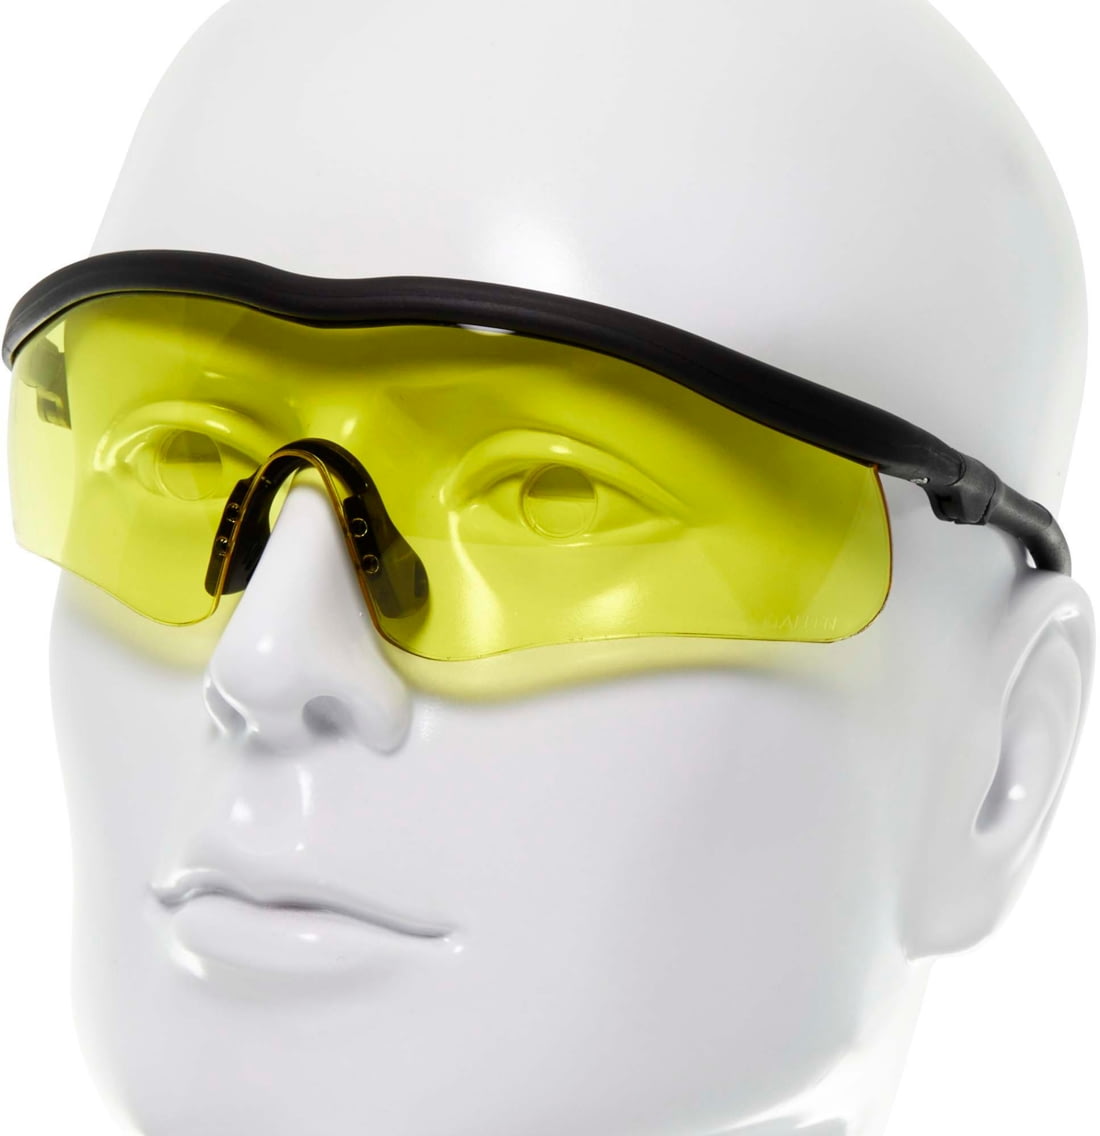 Allen Guardian Shooting Safety Glasses Free Shipping Over 49